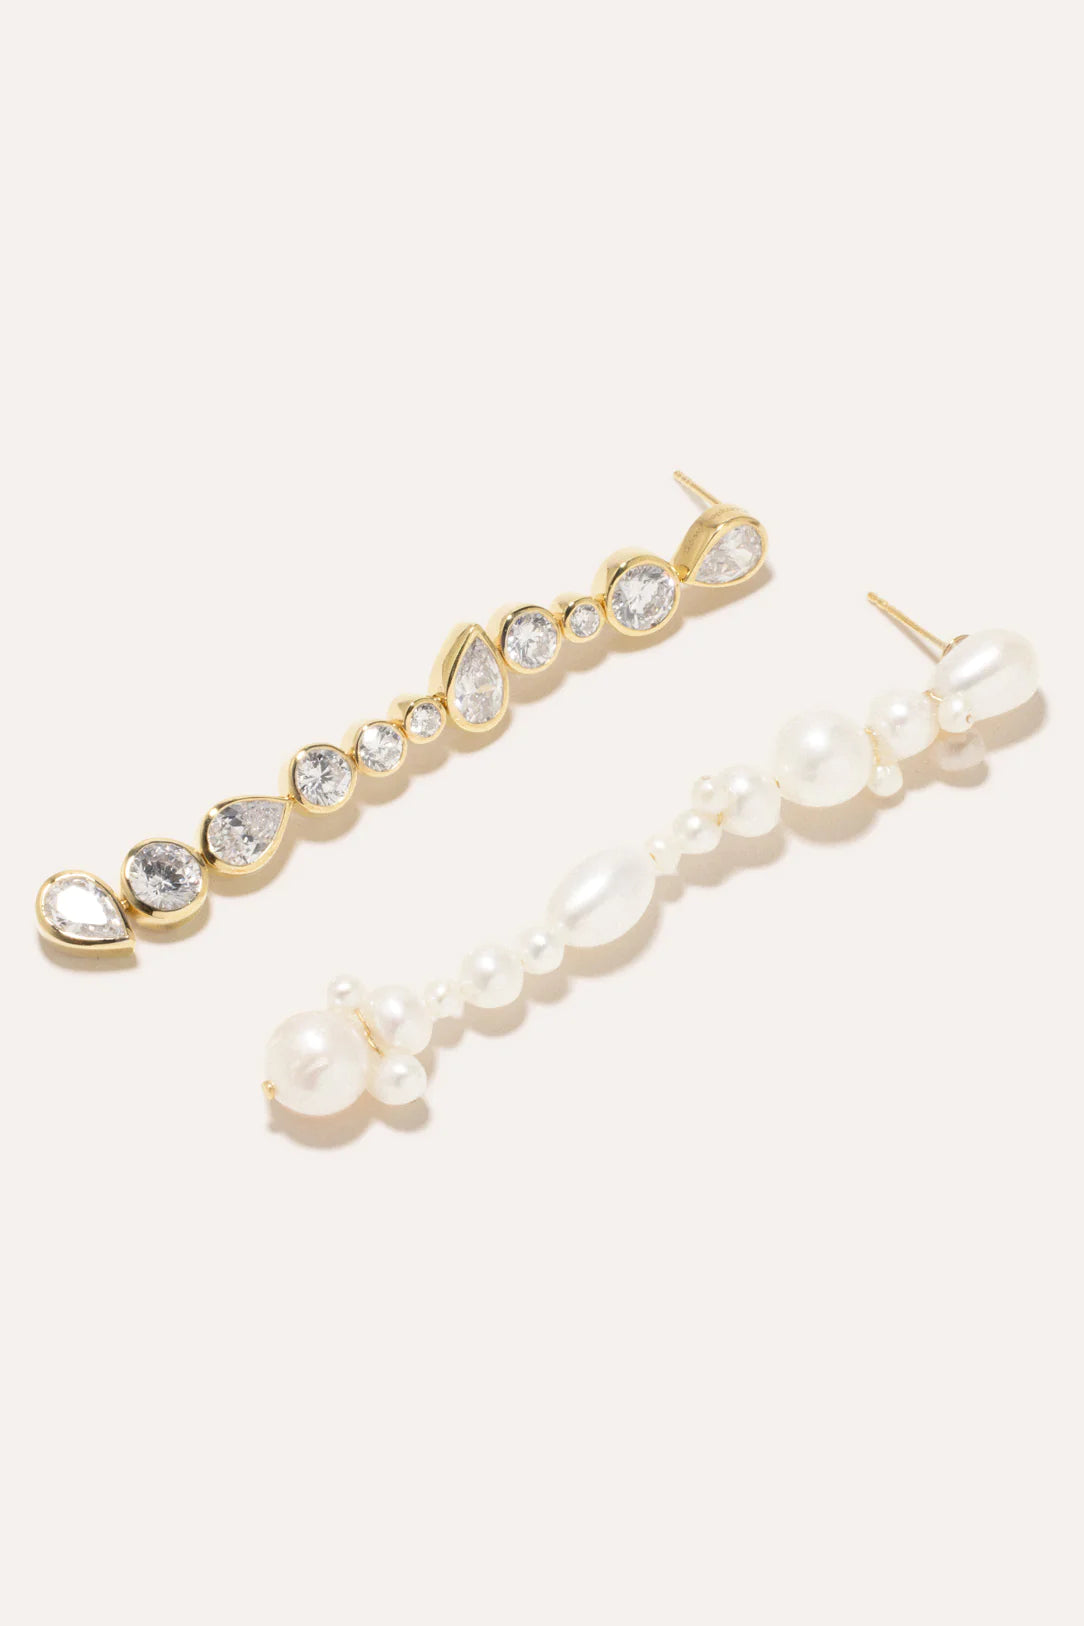 completedworks Glitch Pearl and Zirconia Gold Vermeil Earrings